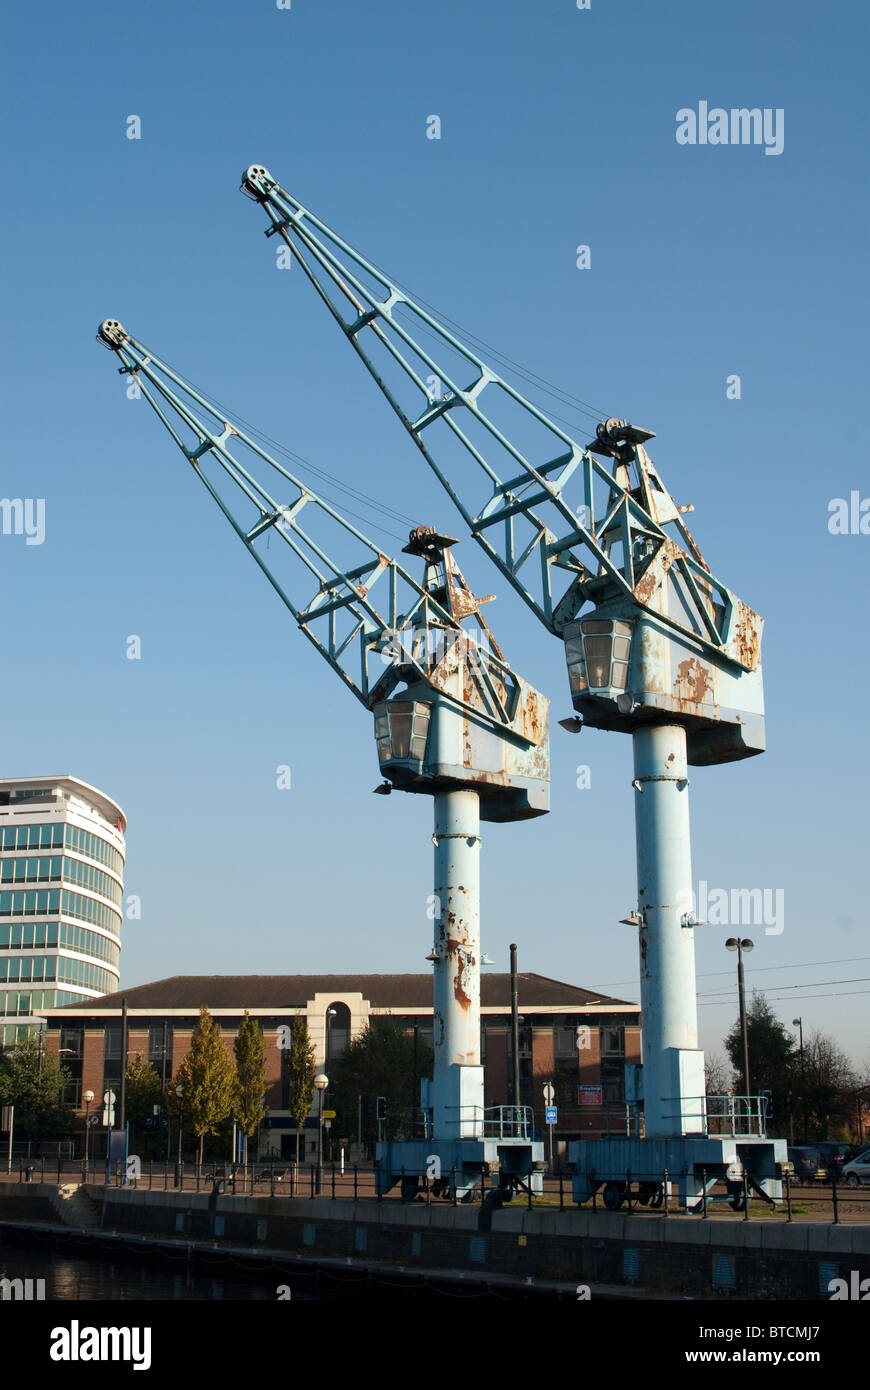 The two disused blue dock cranes at Salford Quays UK against a blue sky Stock Photo